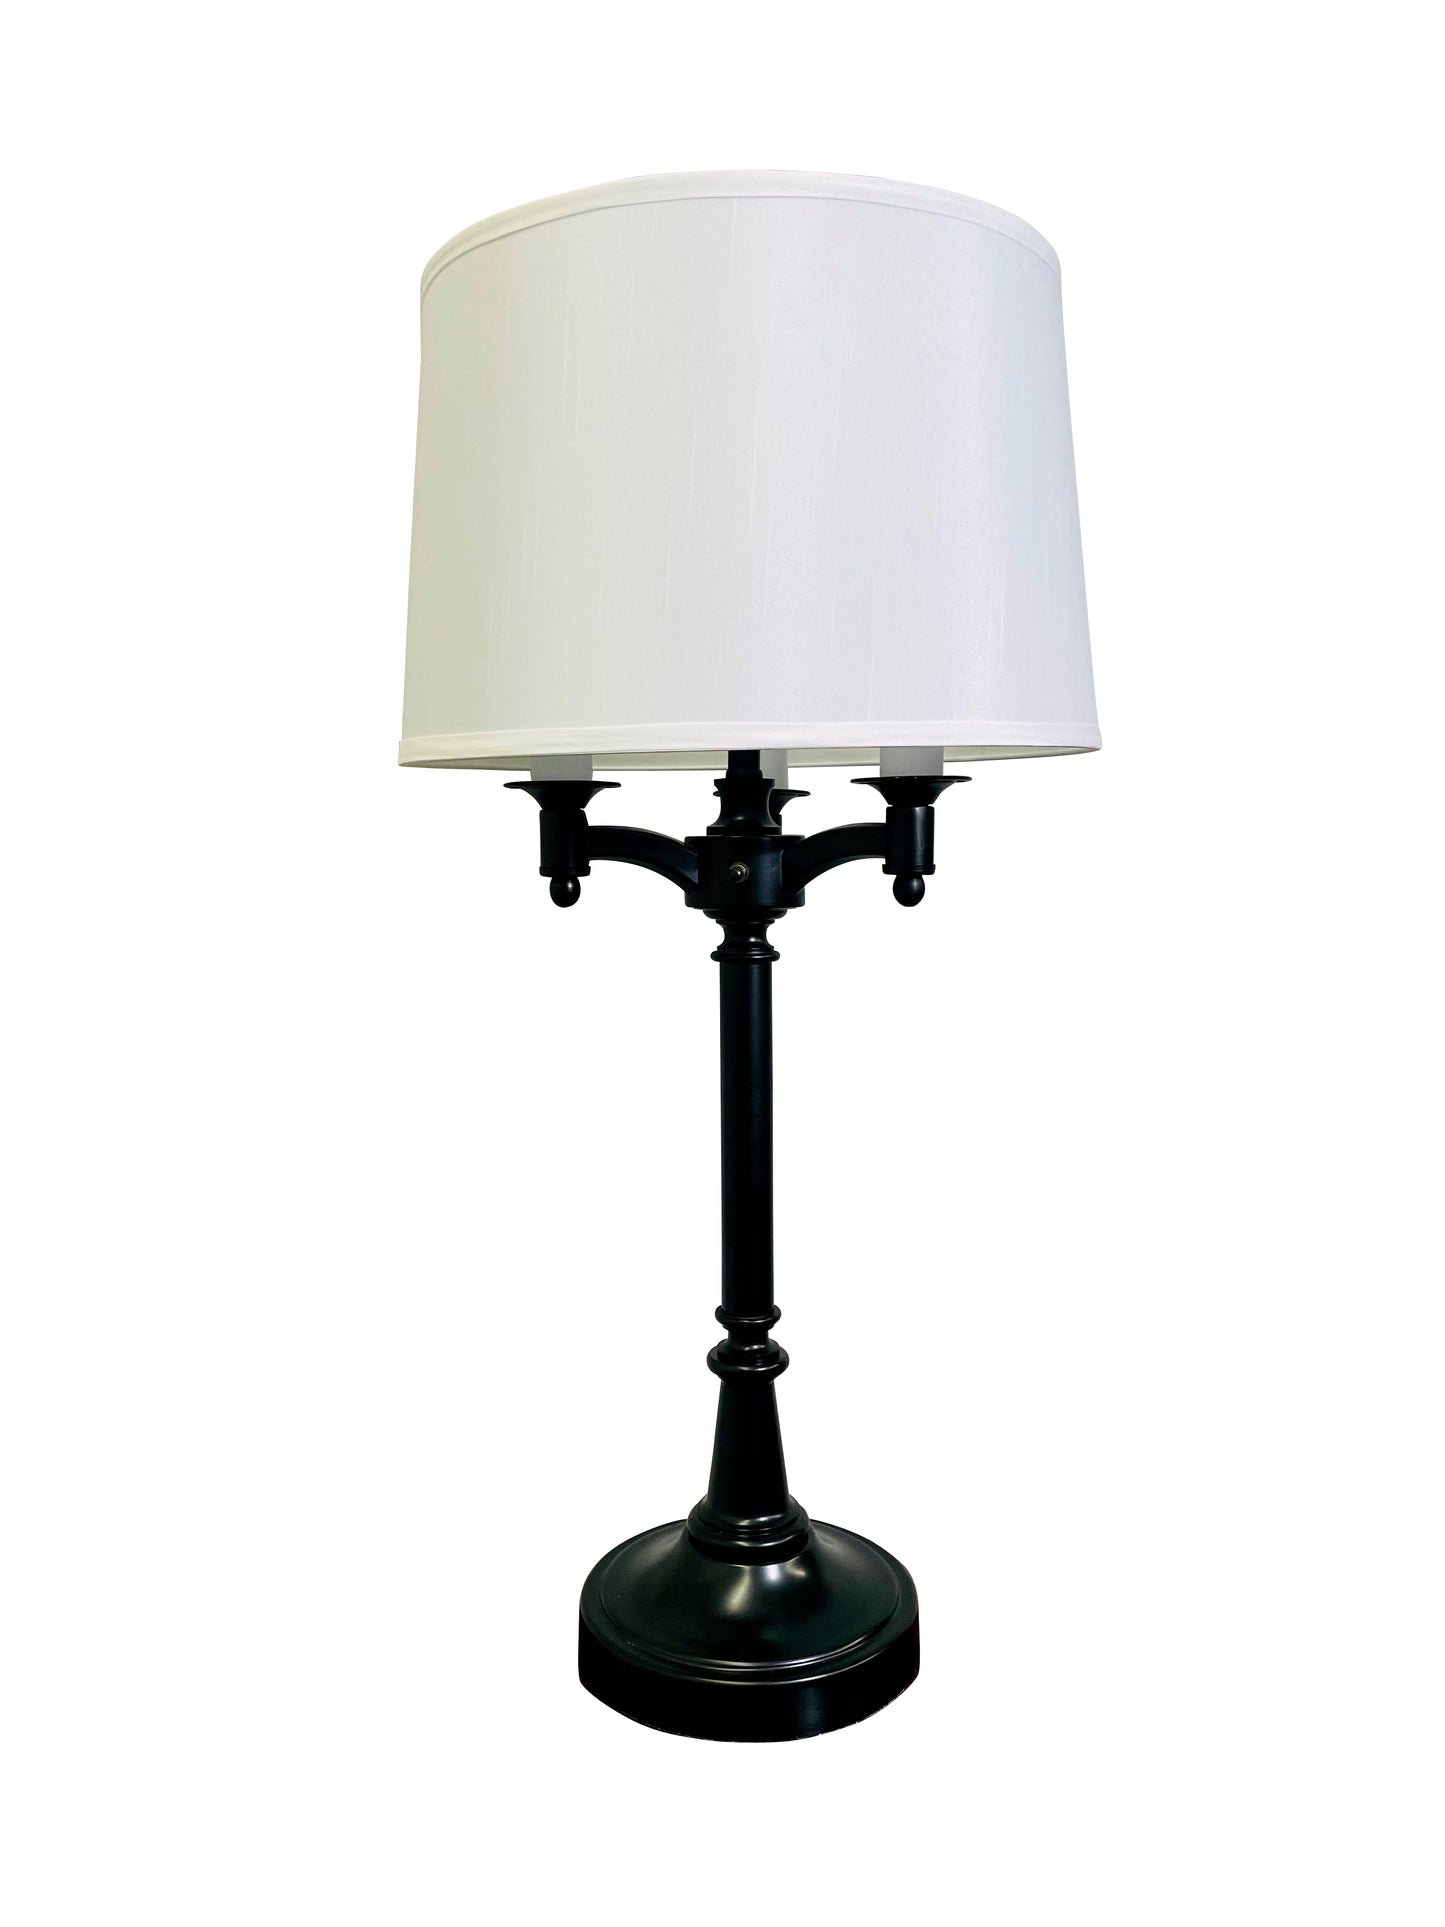 House of Troy Lancaster 31.75" Antique Brass Six Way Table Lamp L850-BLK